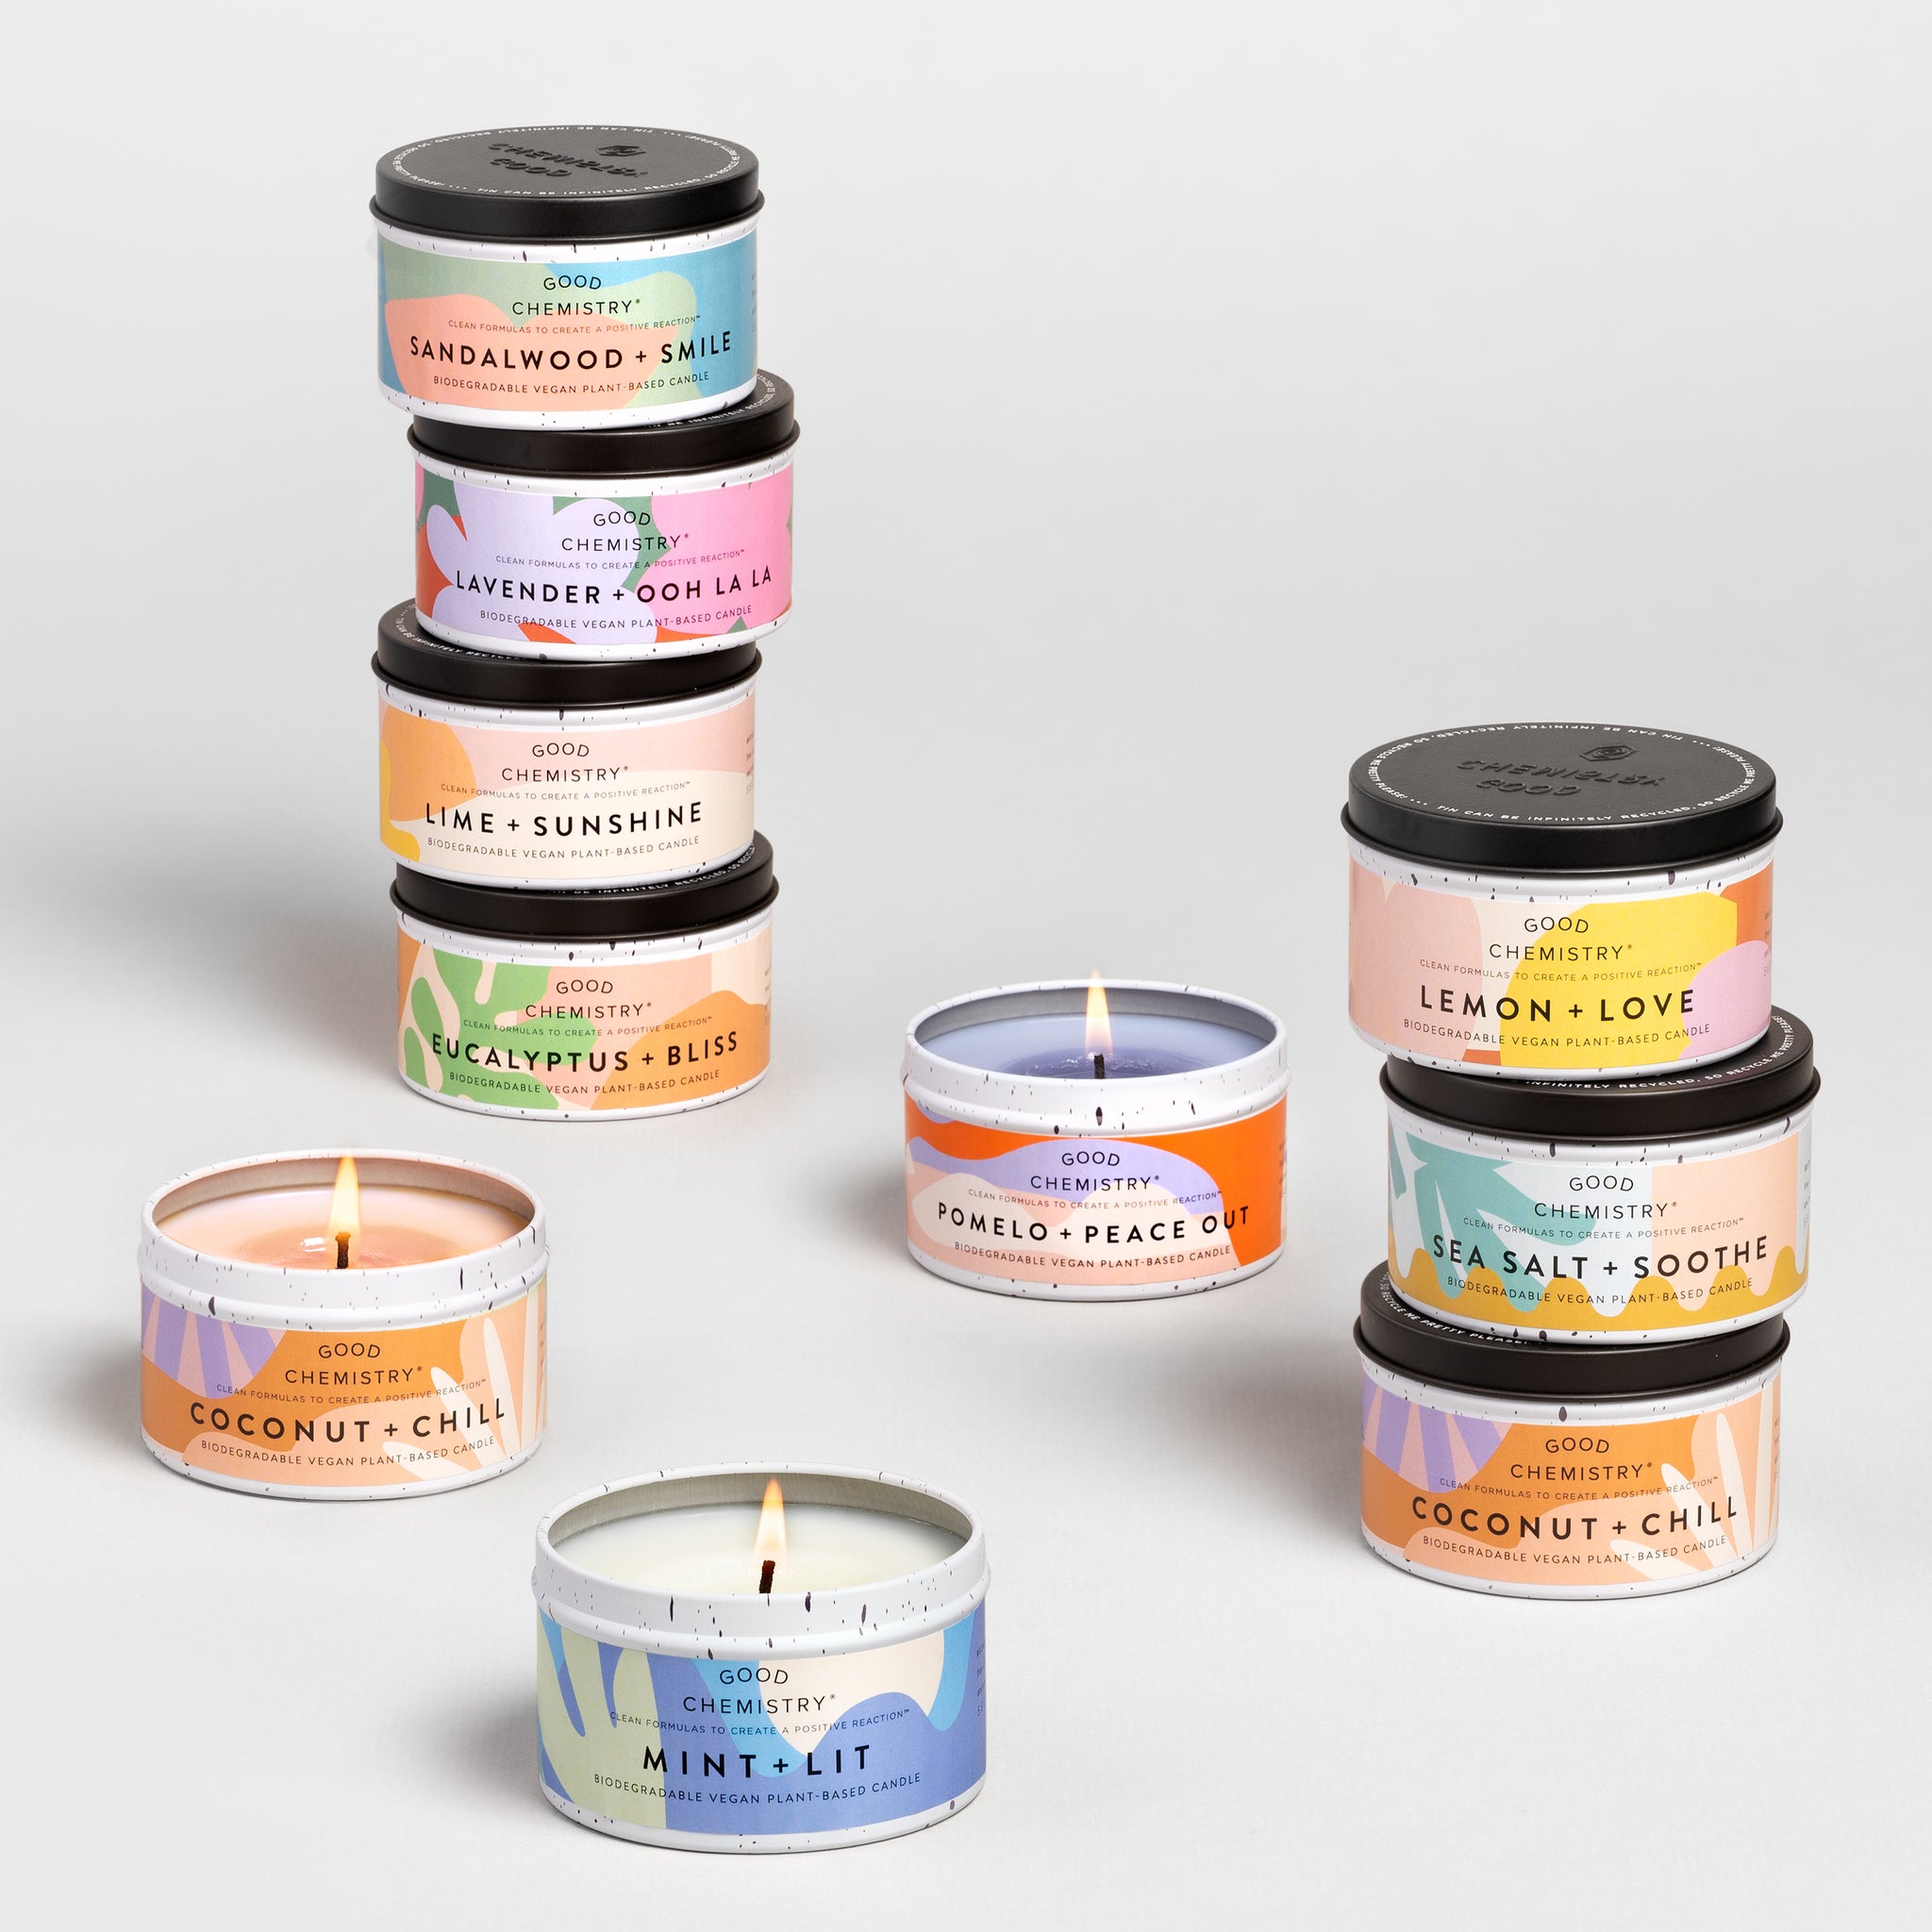 Coconut + Chill Recyclable Tin Candle